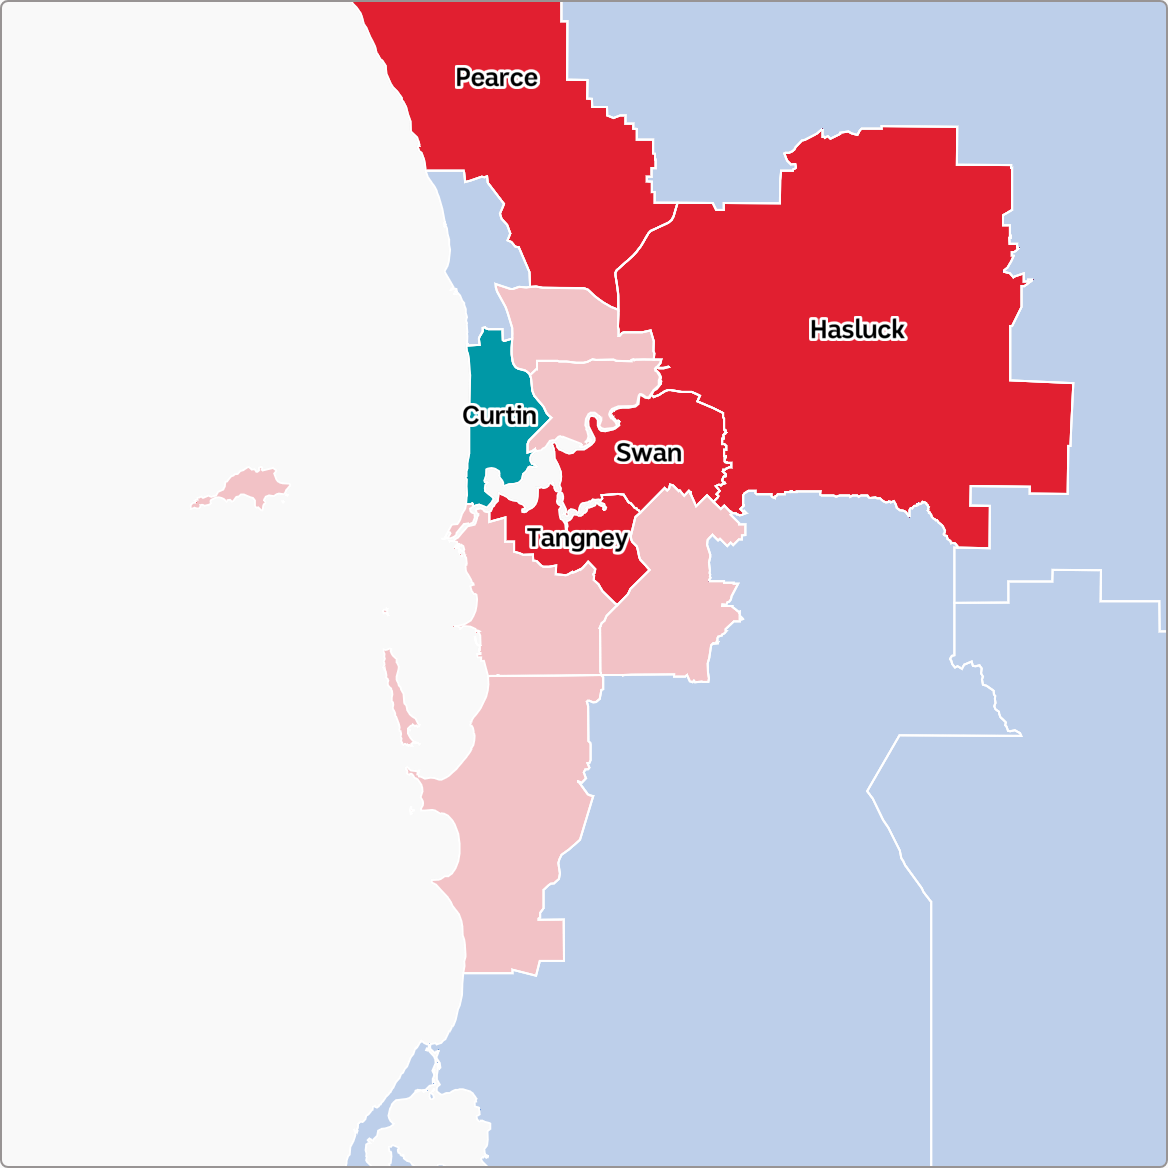 An electoral map of Perth with the seats of Pearce, Haslck, Swan, Tangney and Curtin highlighted.